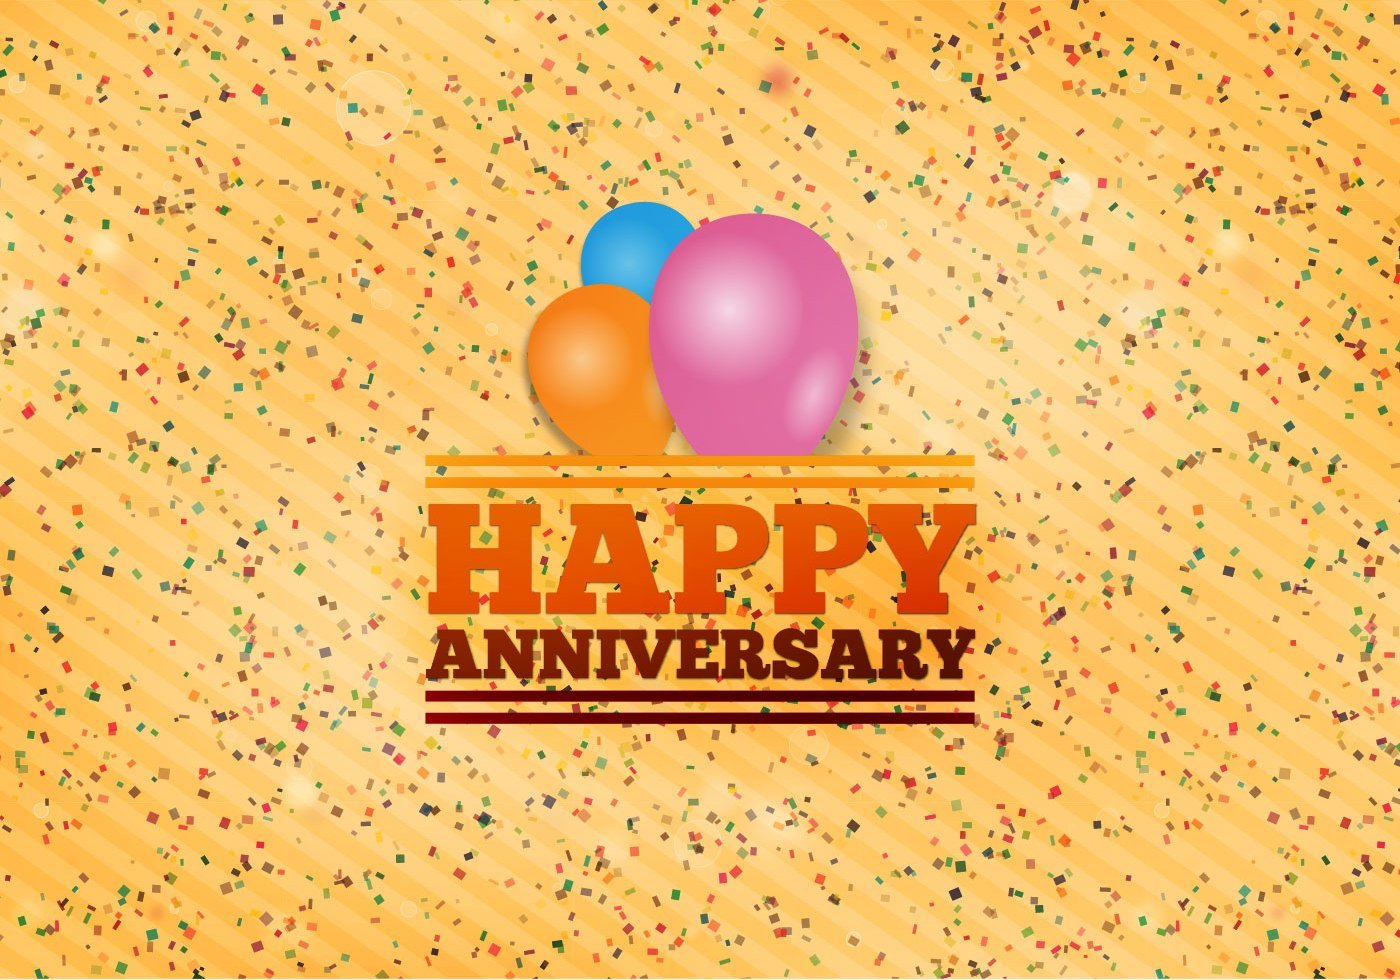 Free download Free Vector Happy Anniversary Background Download ...